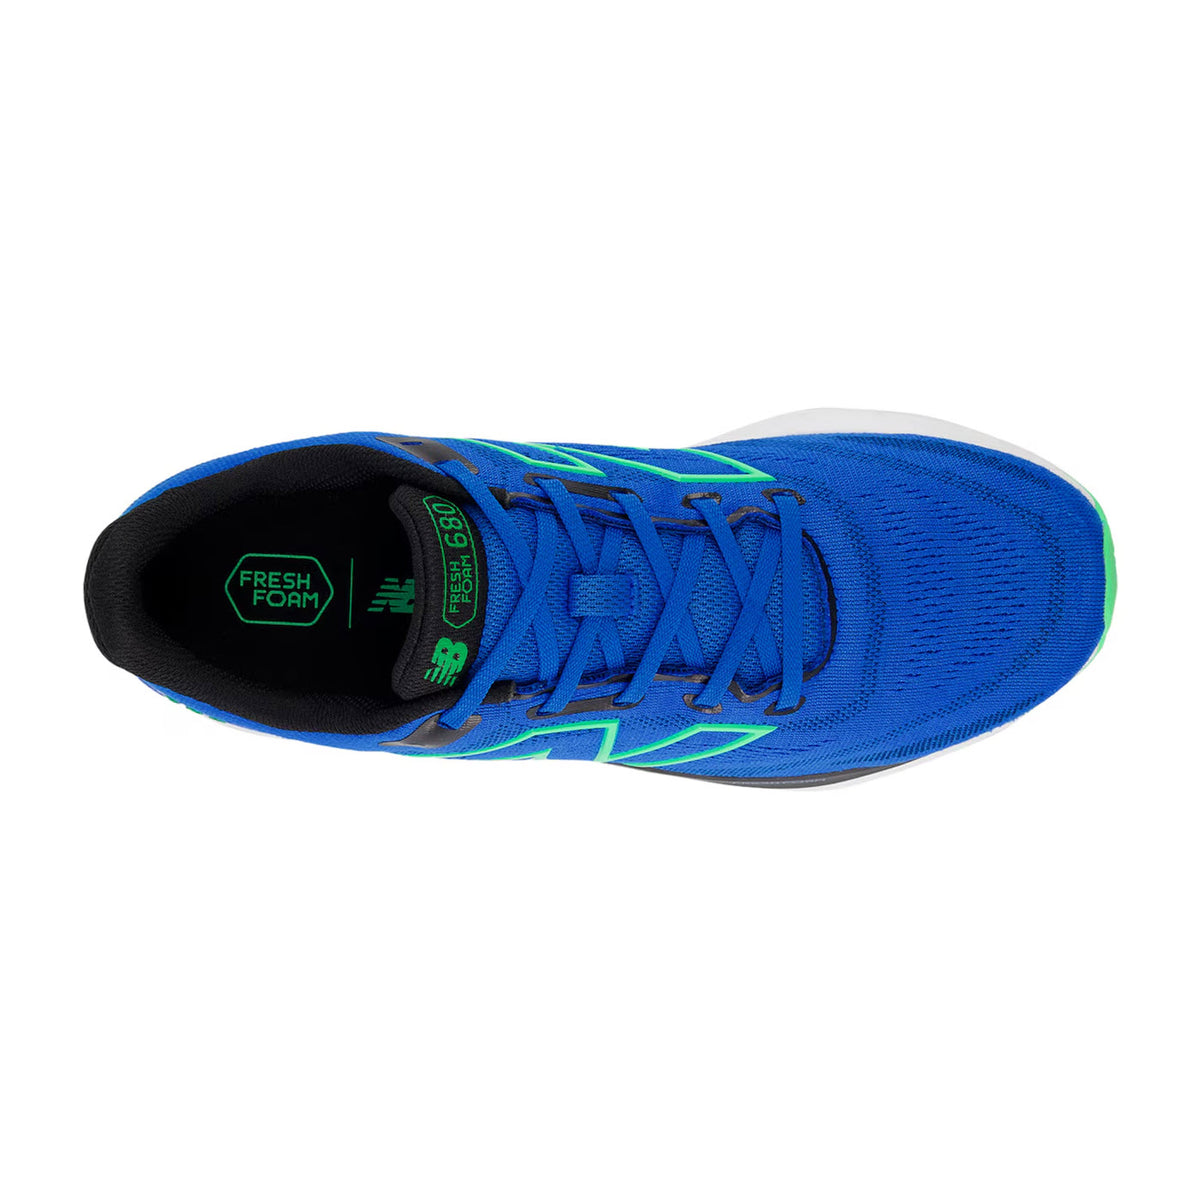 Top view of a blue New Balance 680V8 running shoe with green and yellow accents and &quot;fresh foam&quot; printed inside.